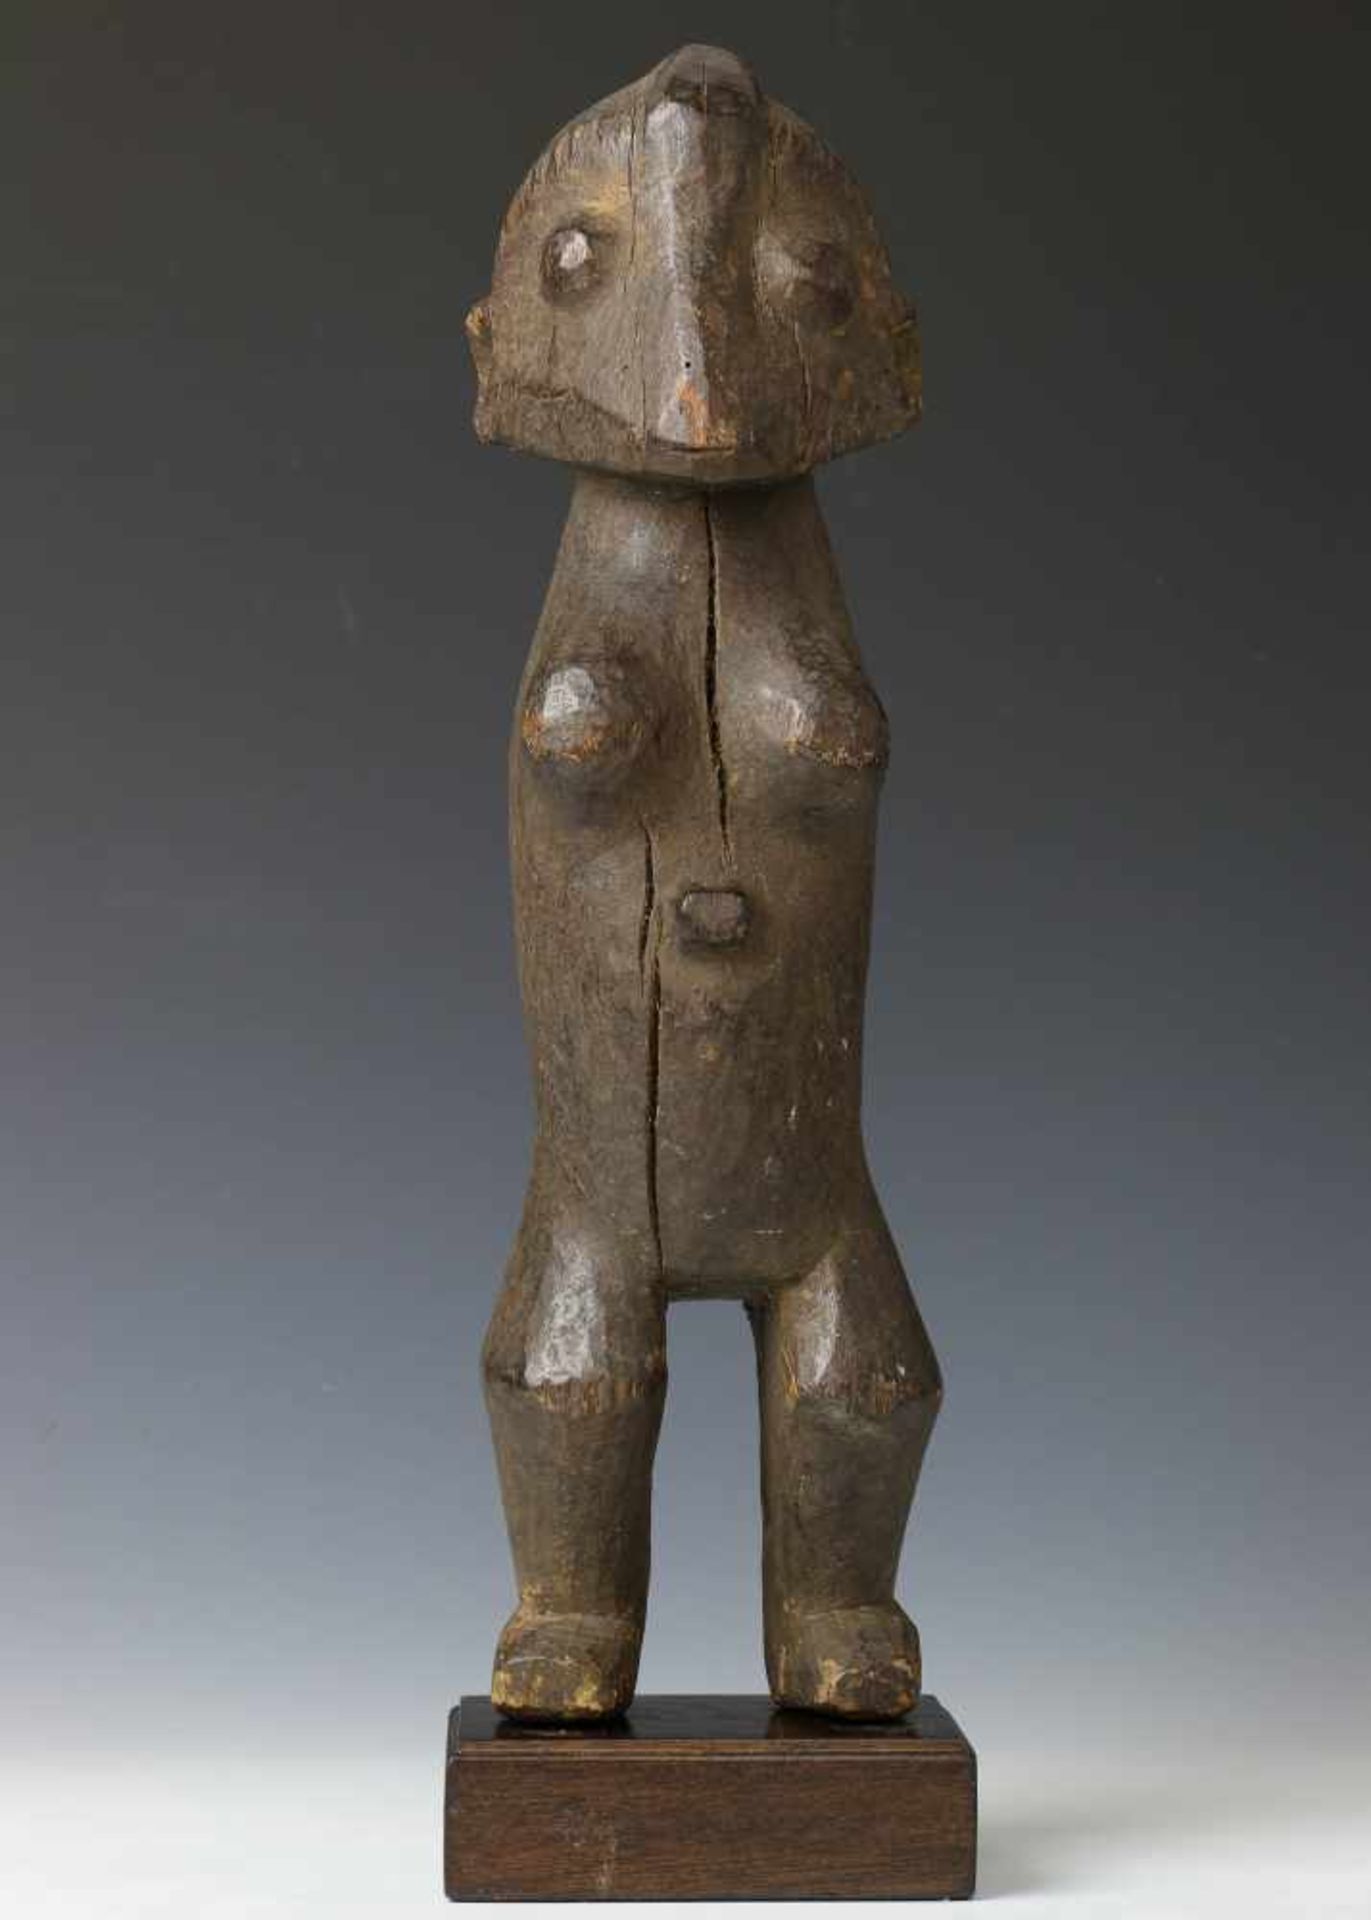 DRC., Zande, standing figure;zoomorph-anthropomorph figure with robust carved features. Hardwood